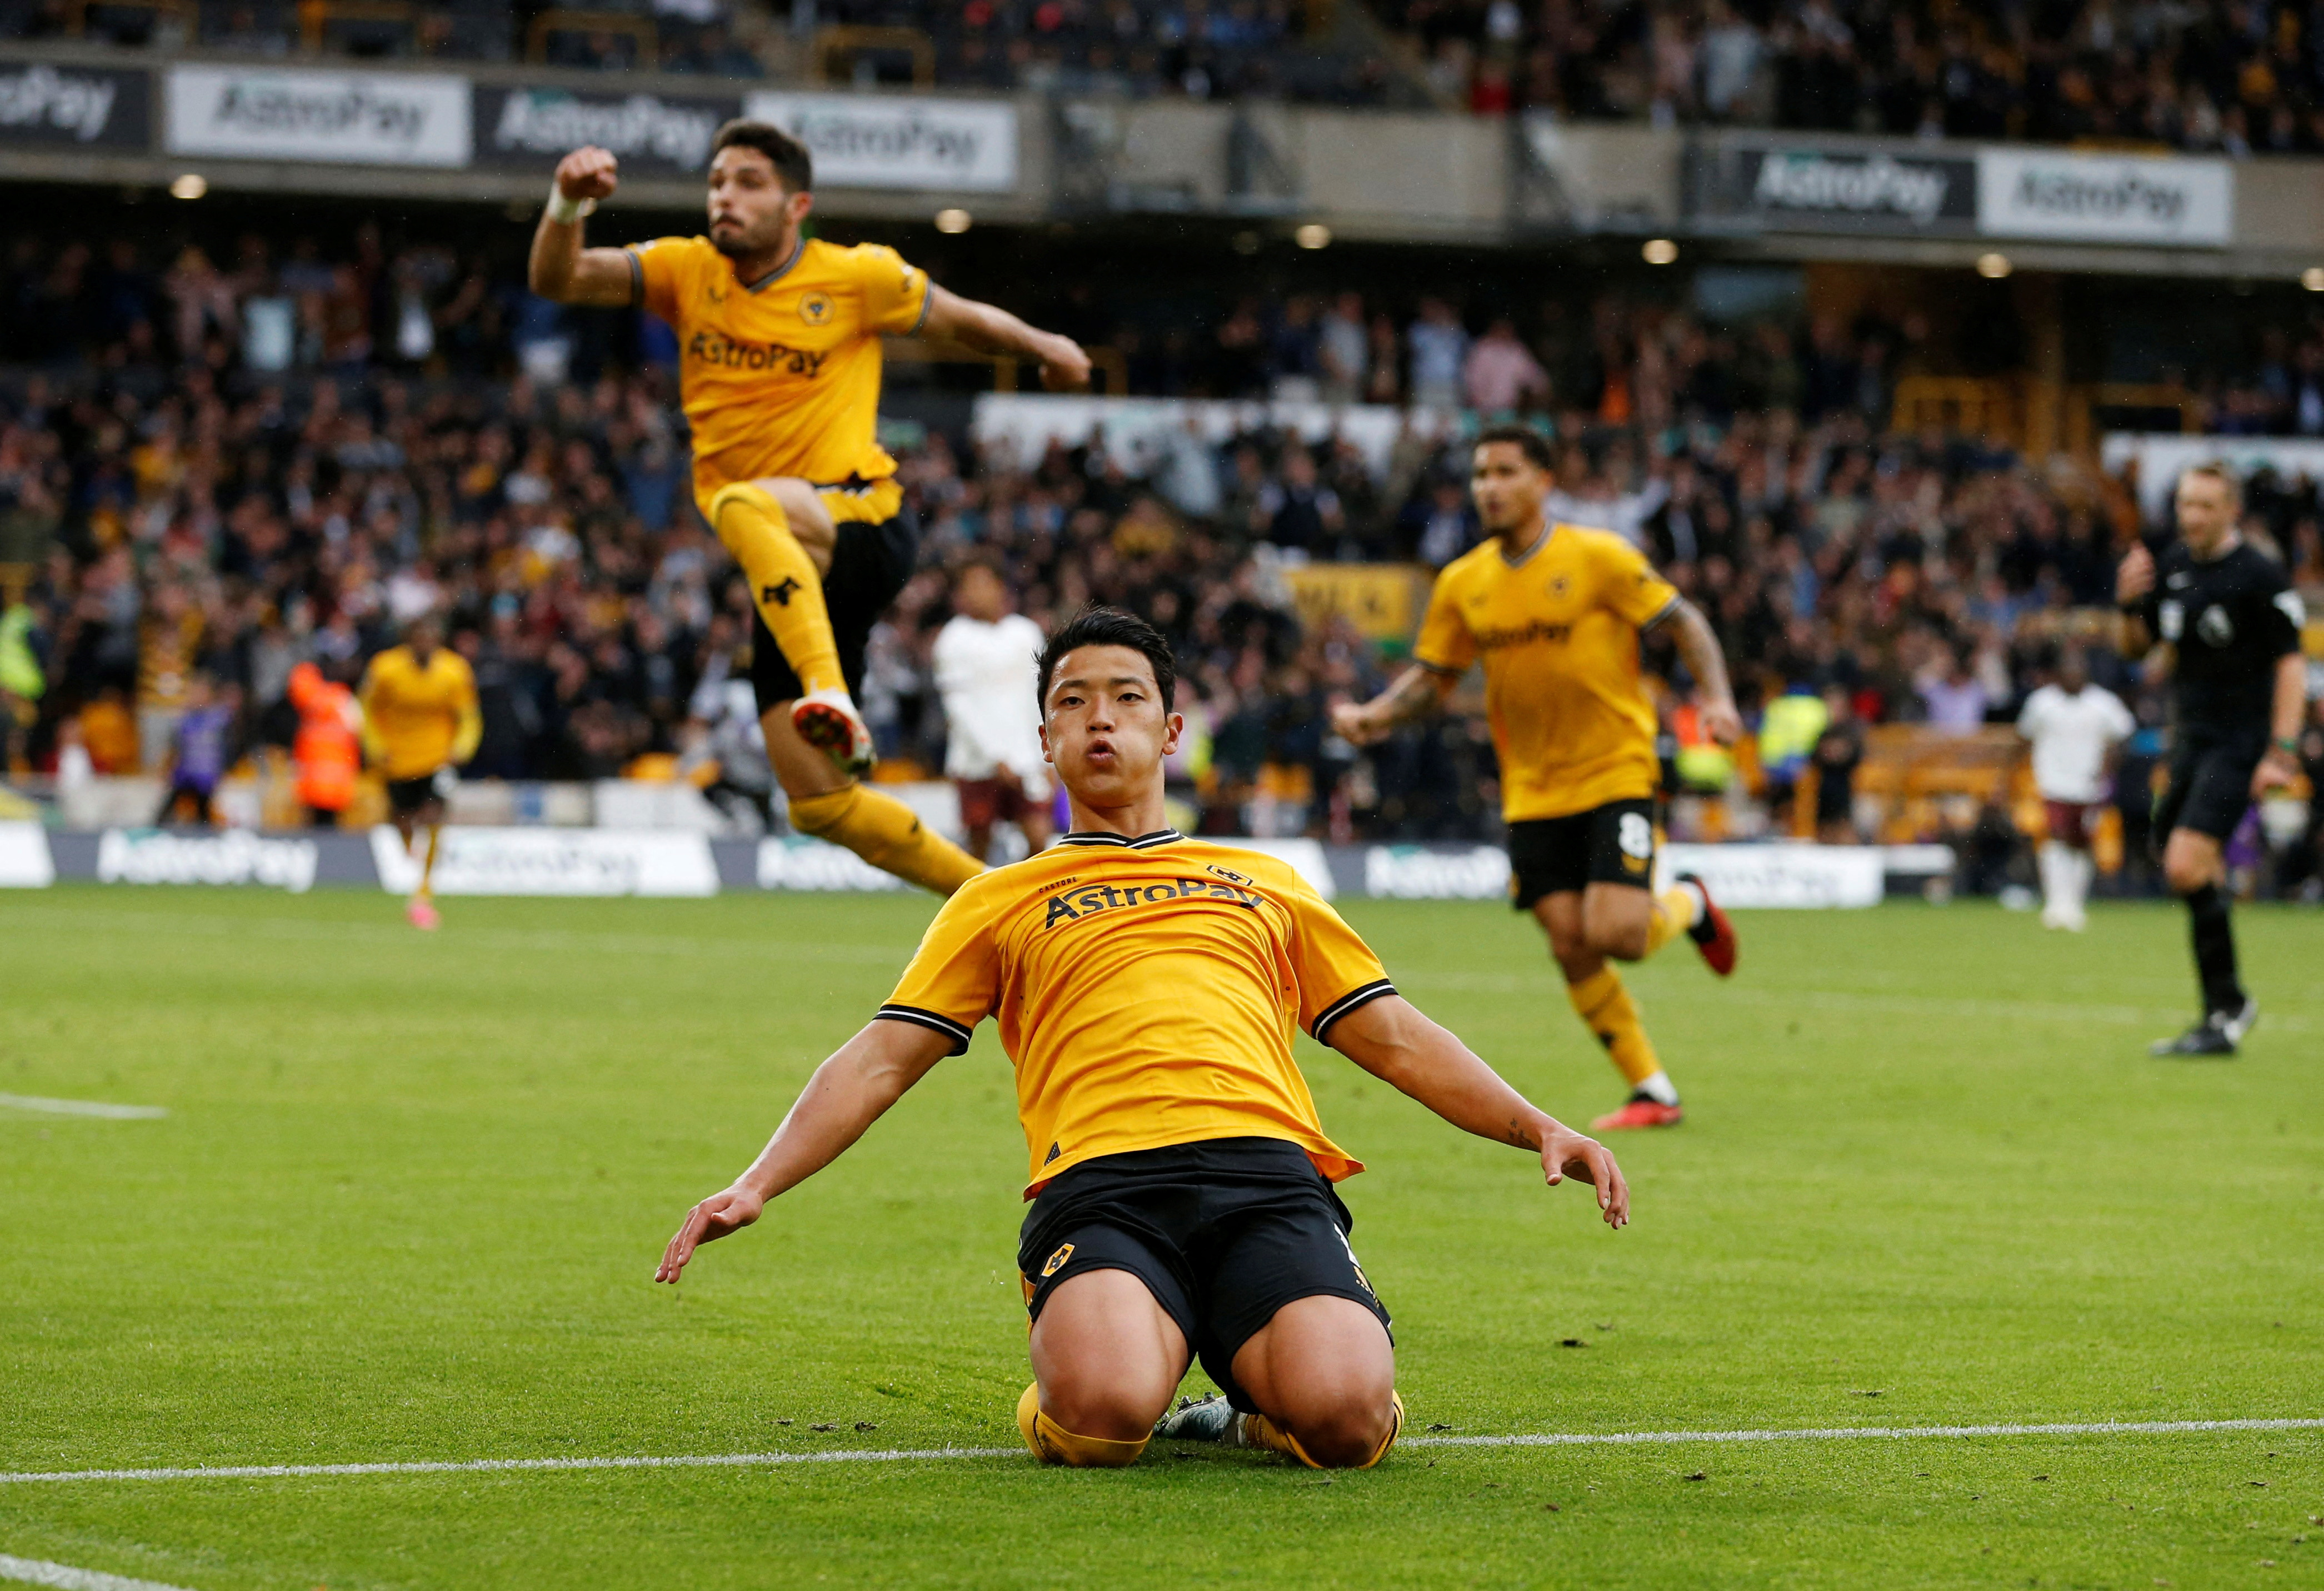 Champions City shocked by Wolves, Spurs down nine-man Liverpool Reuters